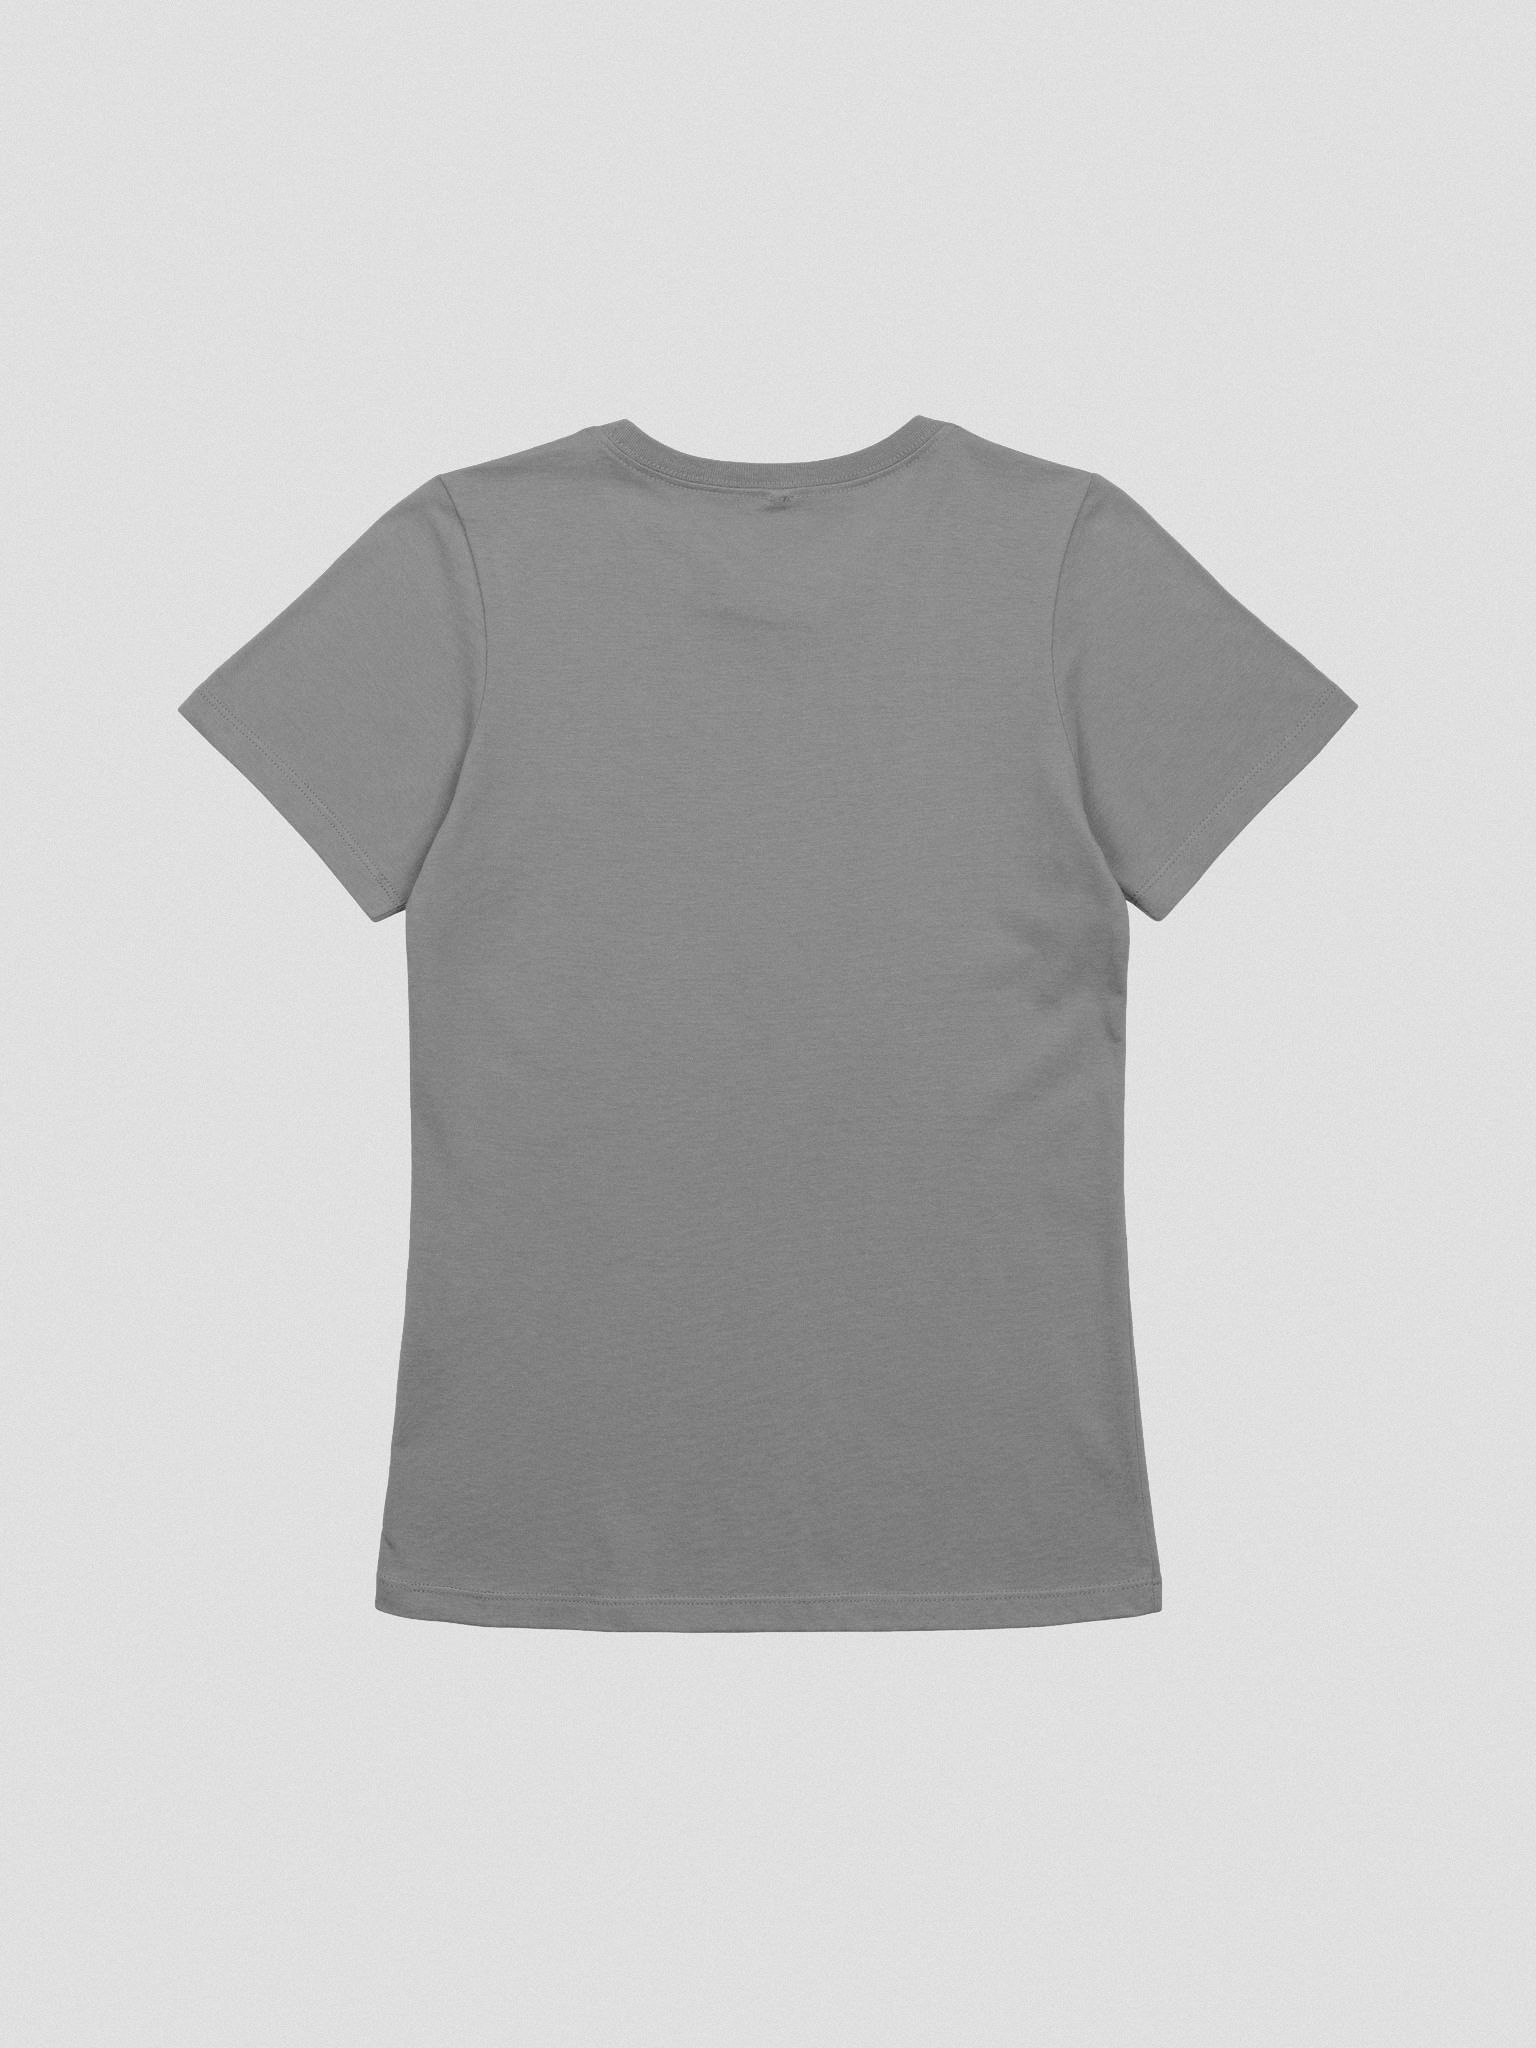 4w25 : Graphic Slim-Fit T-Shirt DOWNLOAD